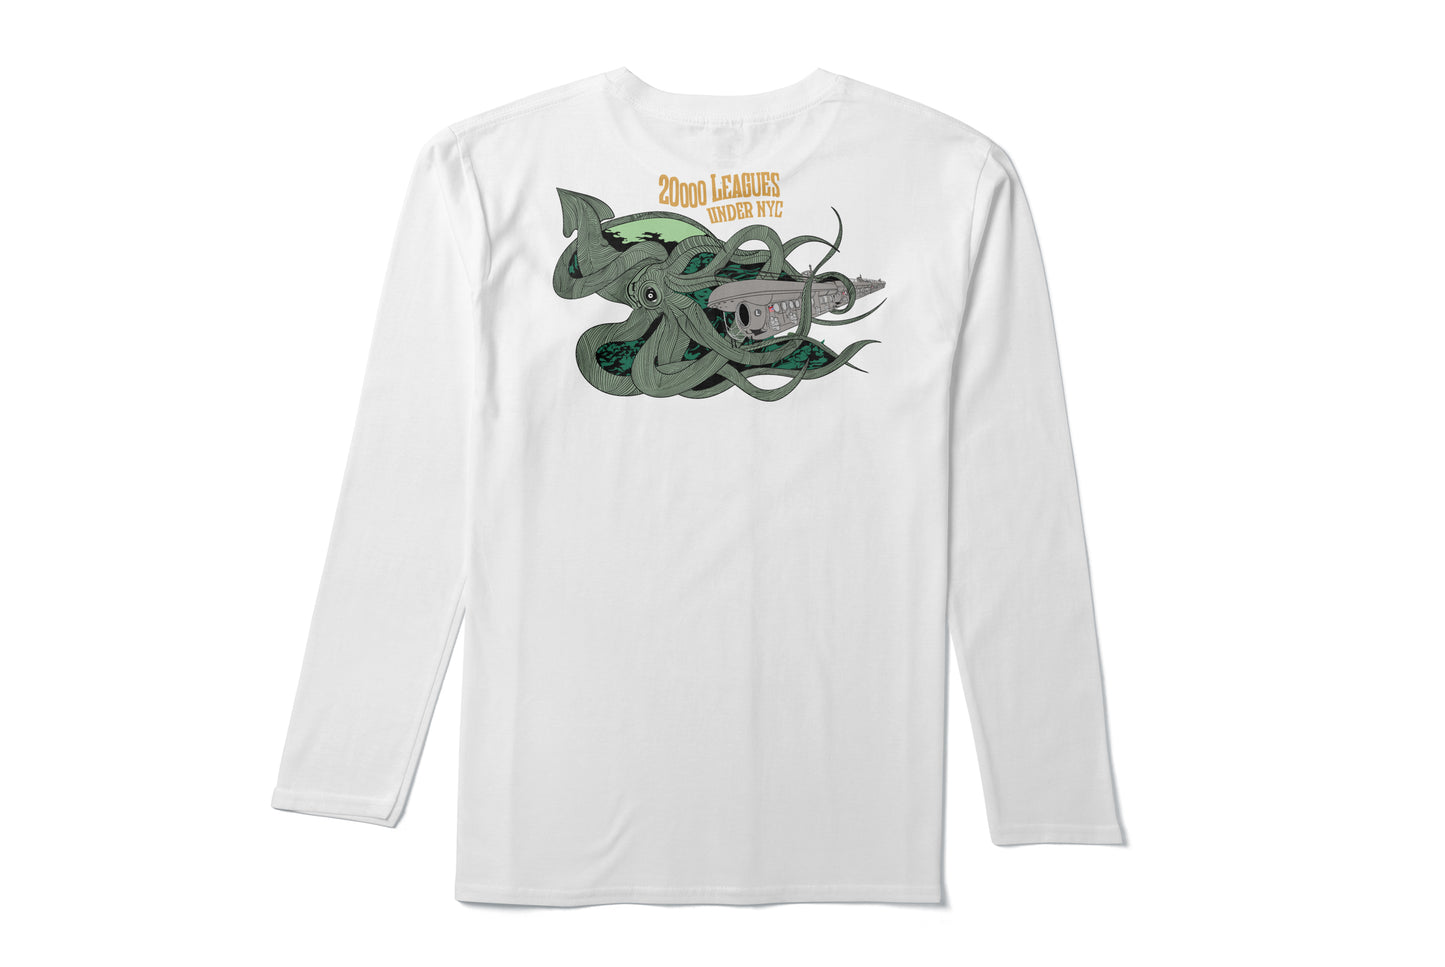 20,000 Leagues Under NYC Heat Transfer on White Long Sleeve Shirt